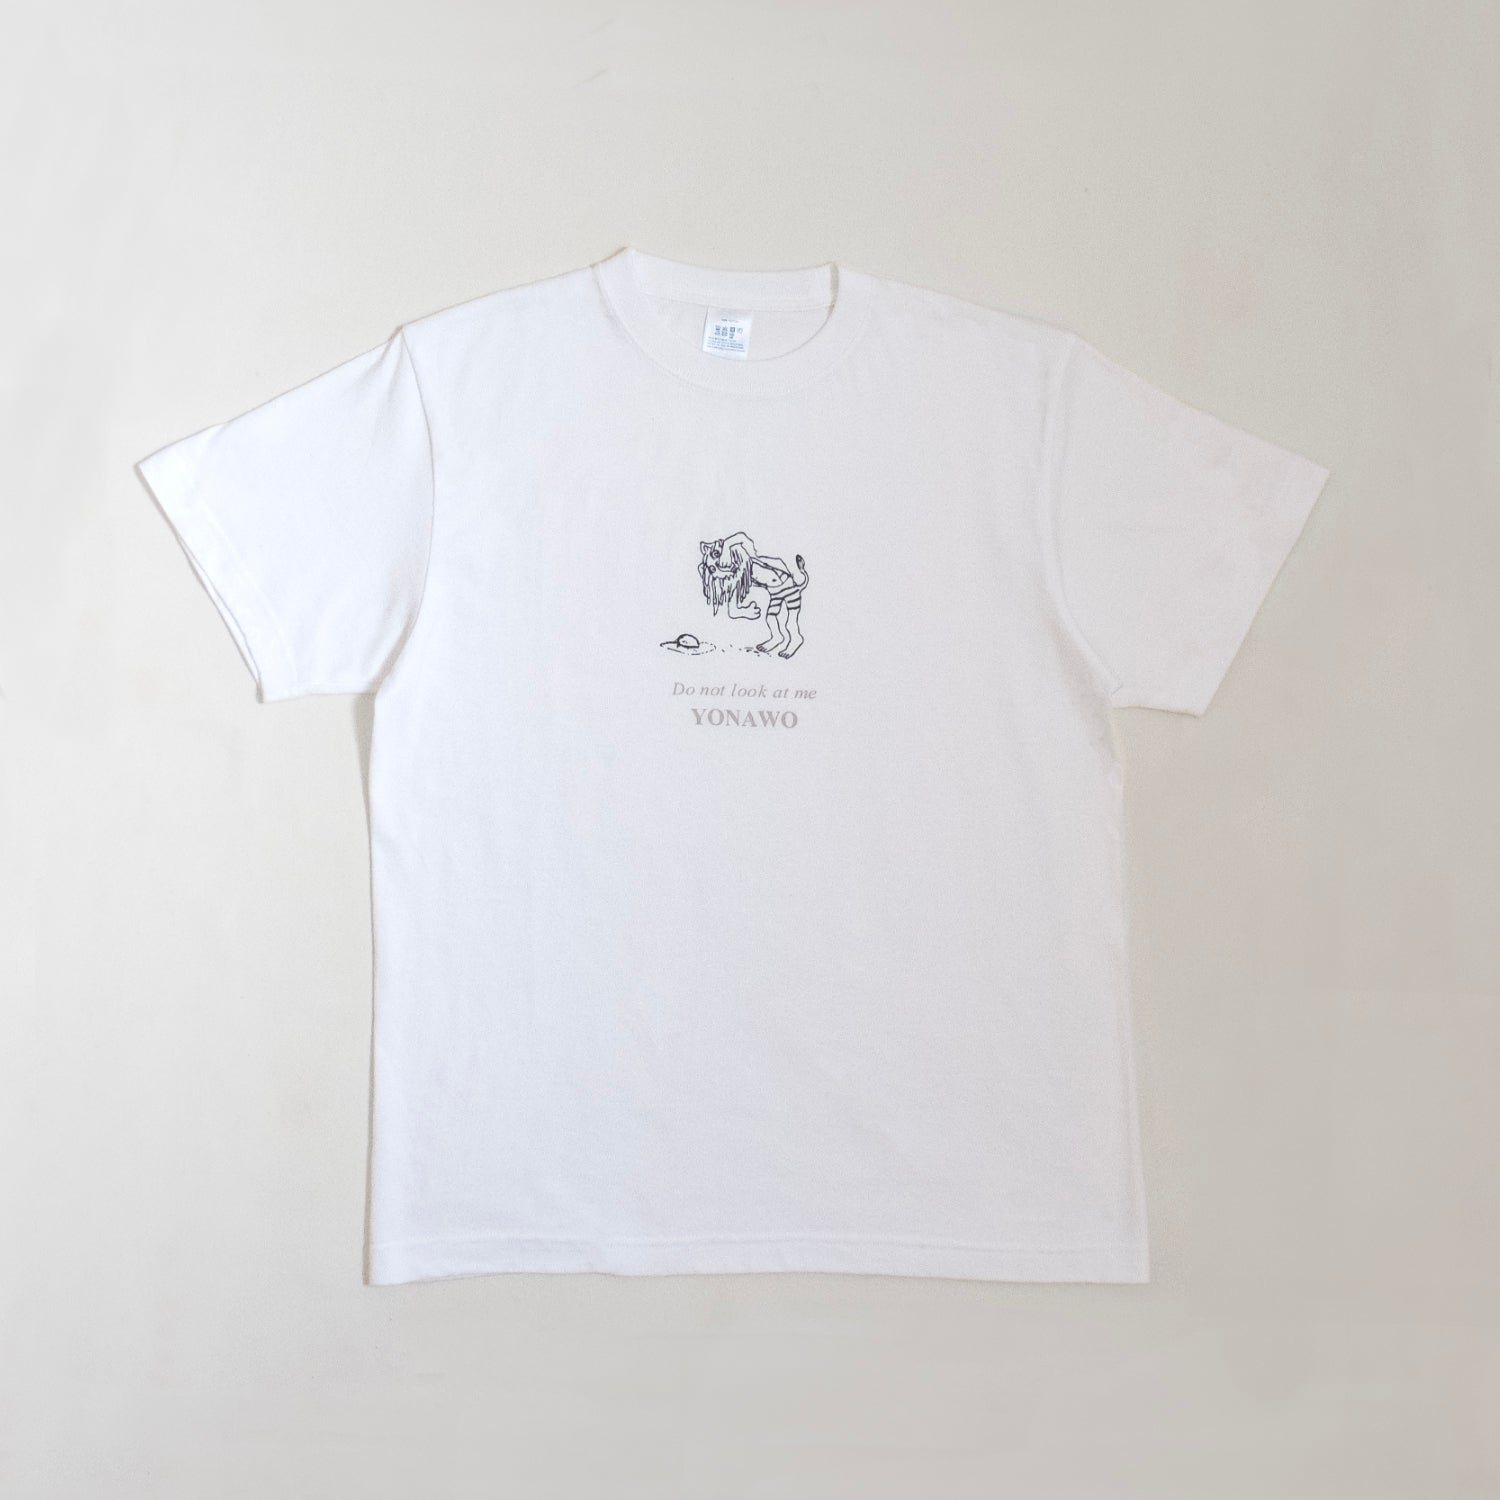 Do not look at me in summer Tシャツ 白